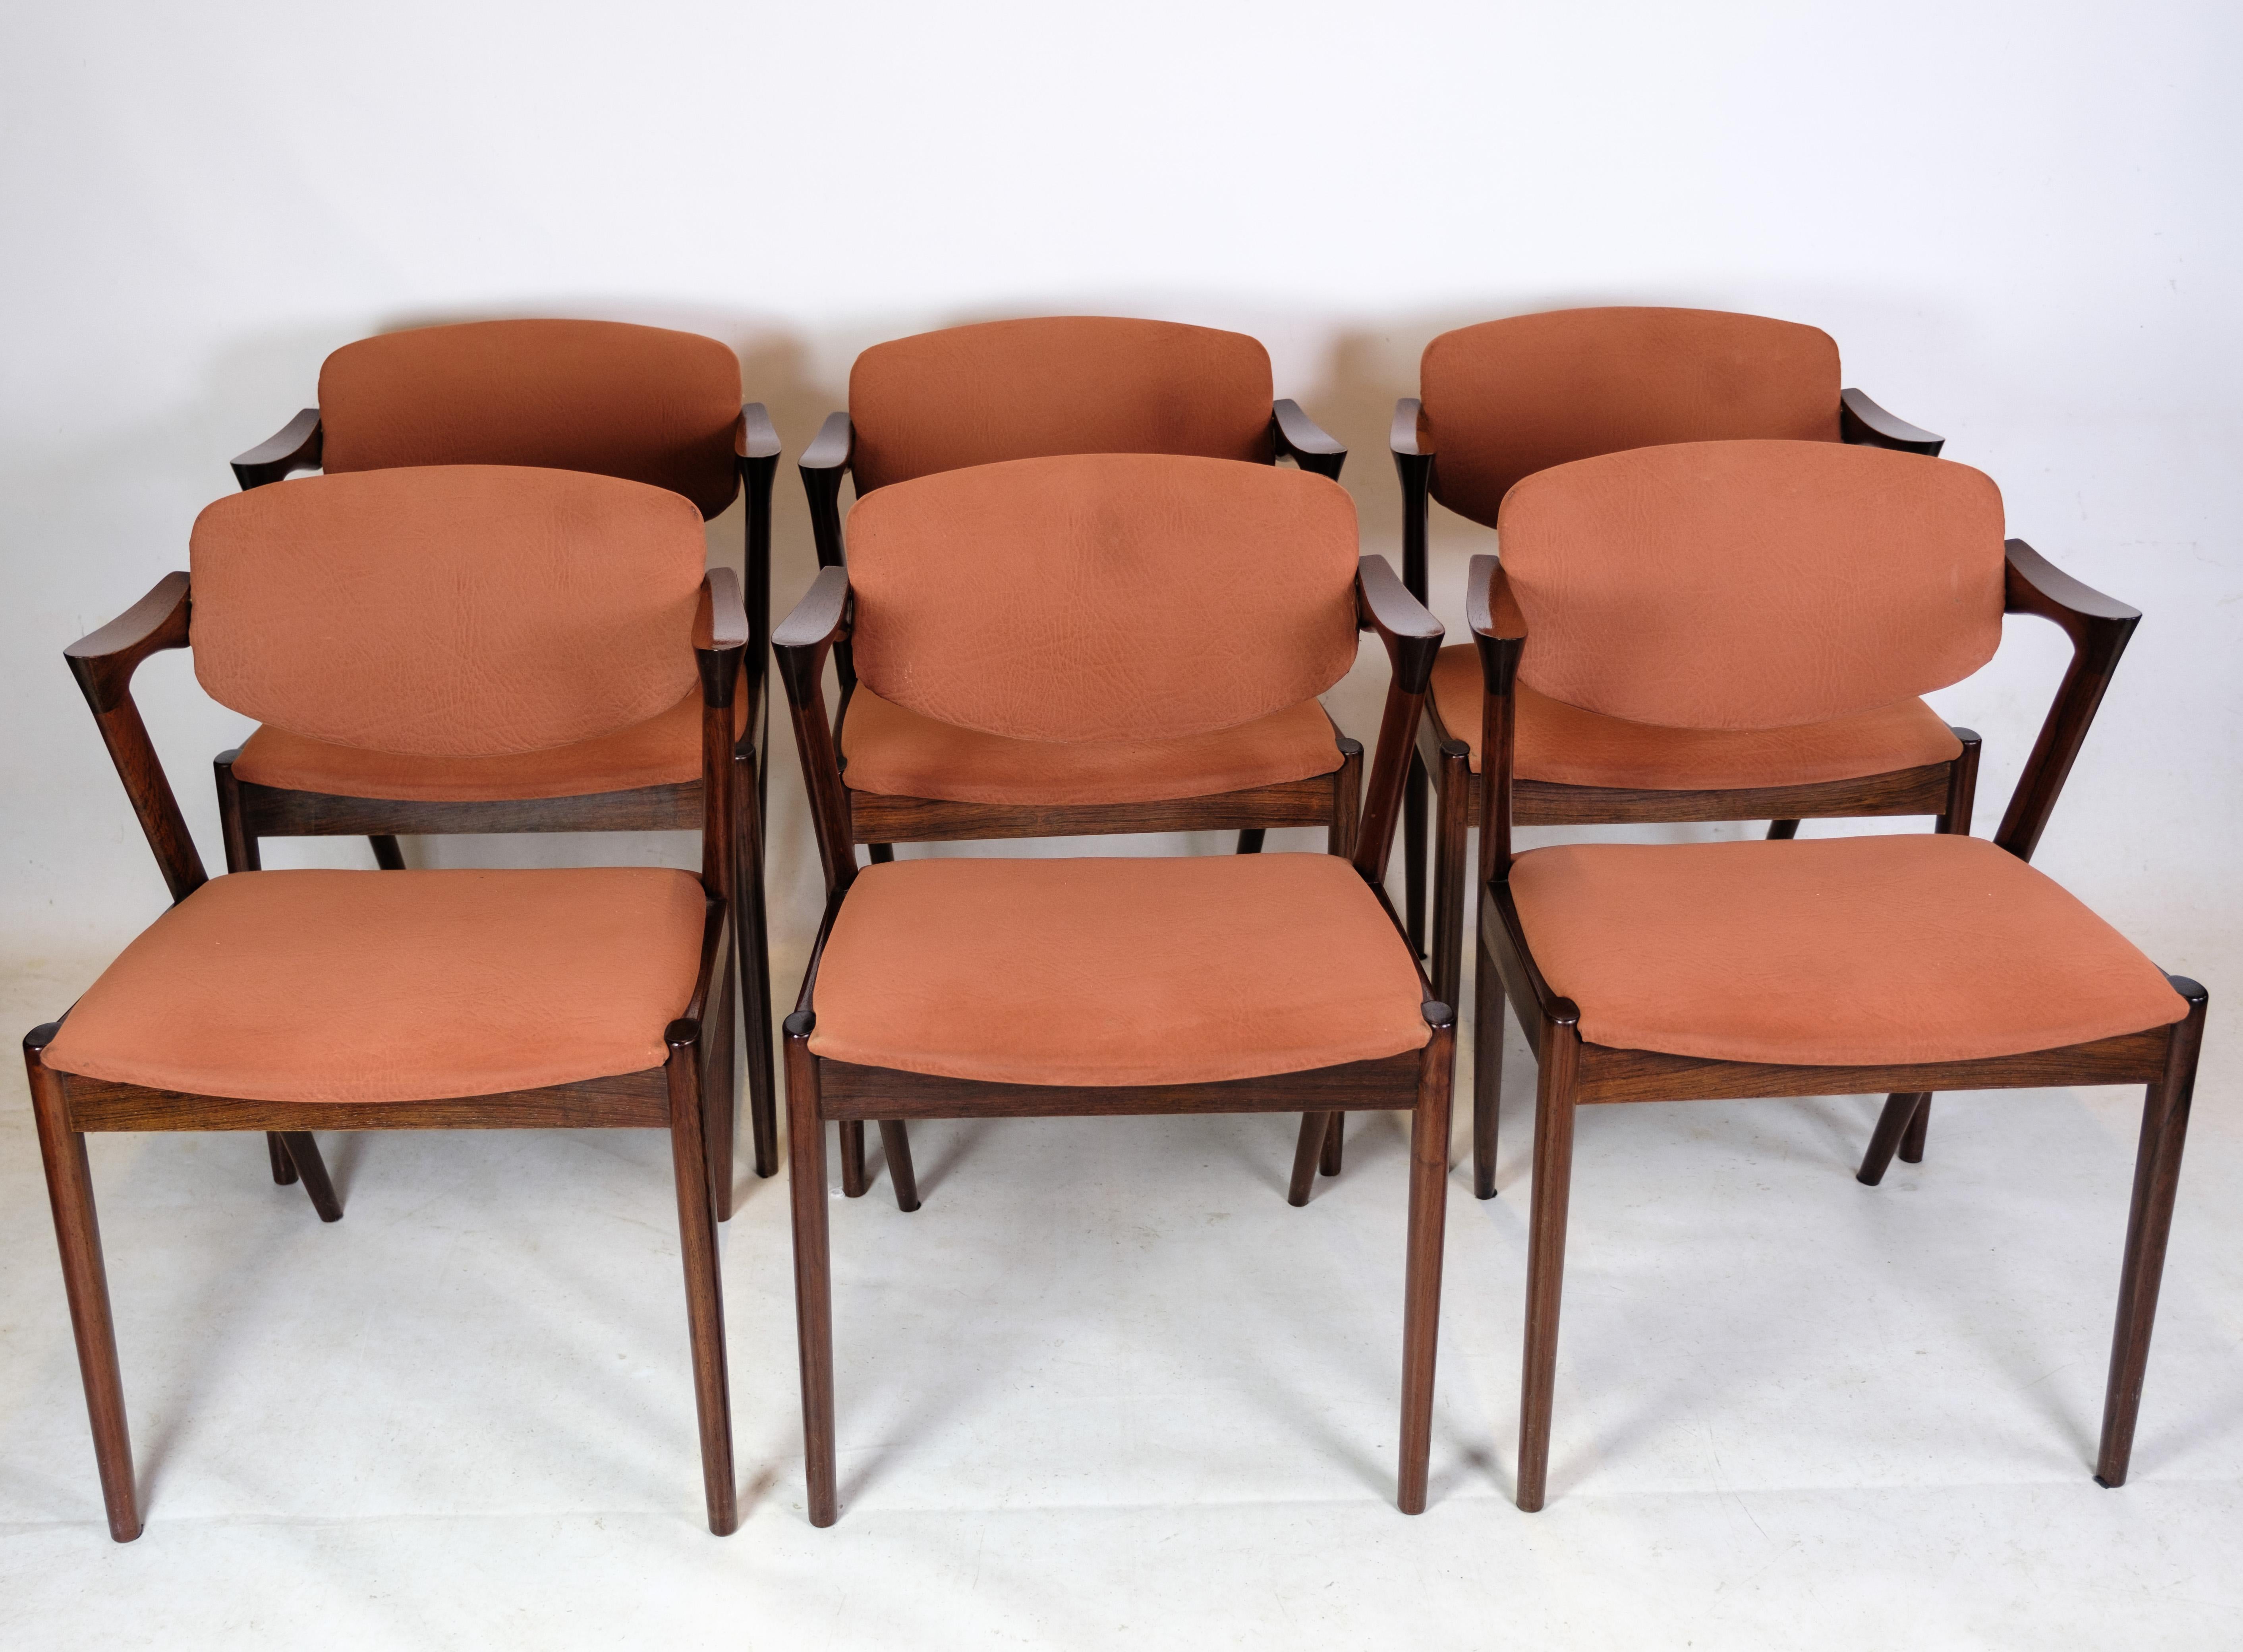 This set of 6 dining chairs is an excellent representation of the timeless and elegant style that characterizes mid-20th century Danish furniture design. The chairs are model 42, designed by the renowned Danish designer Kai Kristiansen and